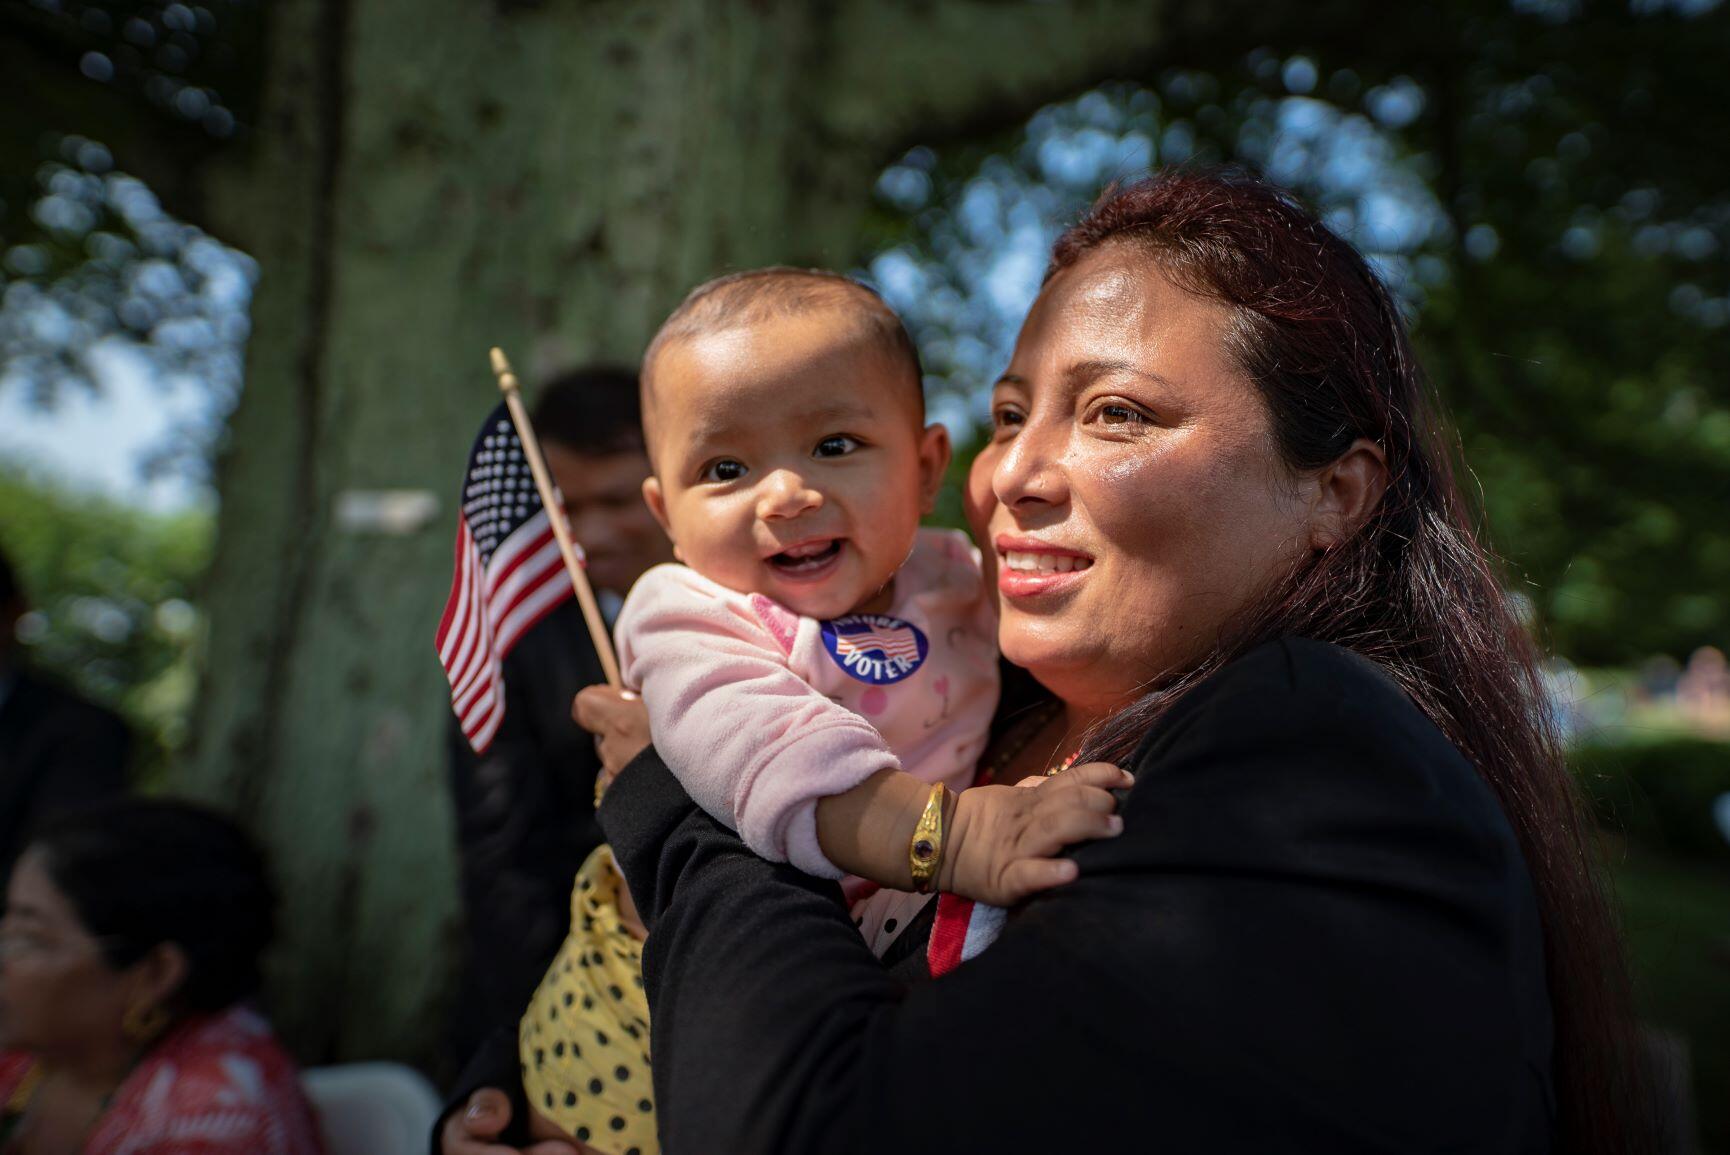 A newly naturalized citizen at a citizenship ceremony holds her baby and a small American flag. Both are smiling and the baby has a sticker on its shirt that says "Future Voter." 